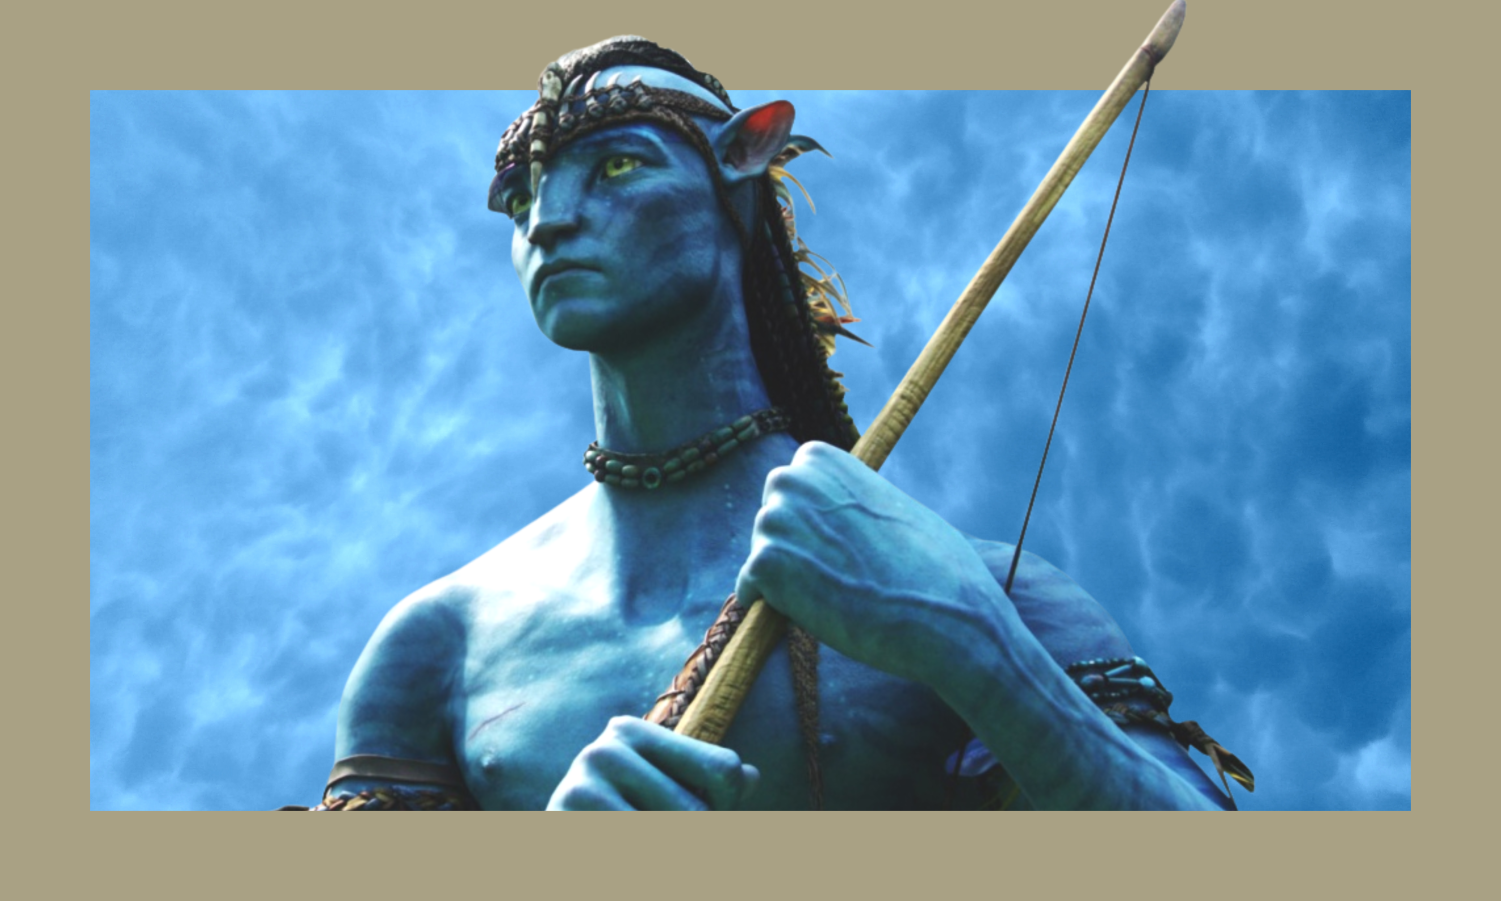 Blue+background+with+Jake+the+Avatar+holding+a+bow.